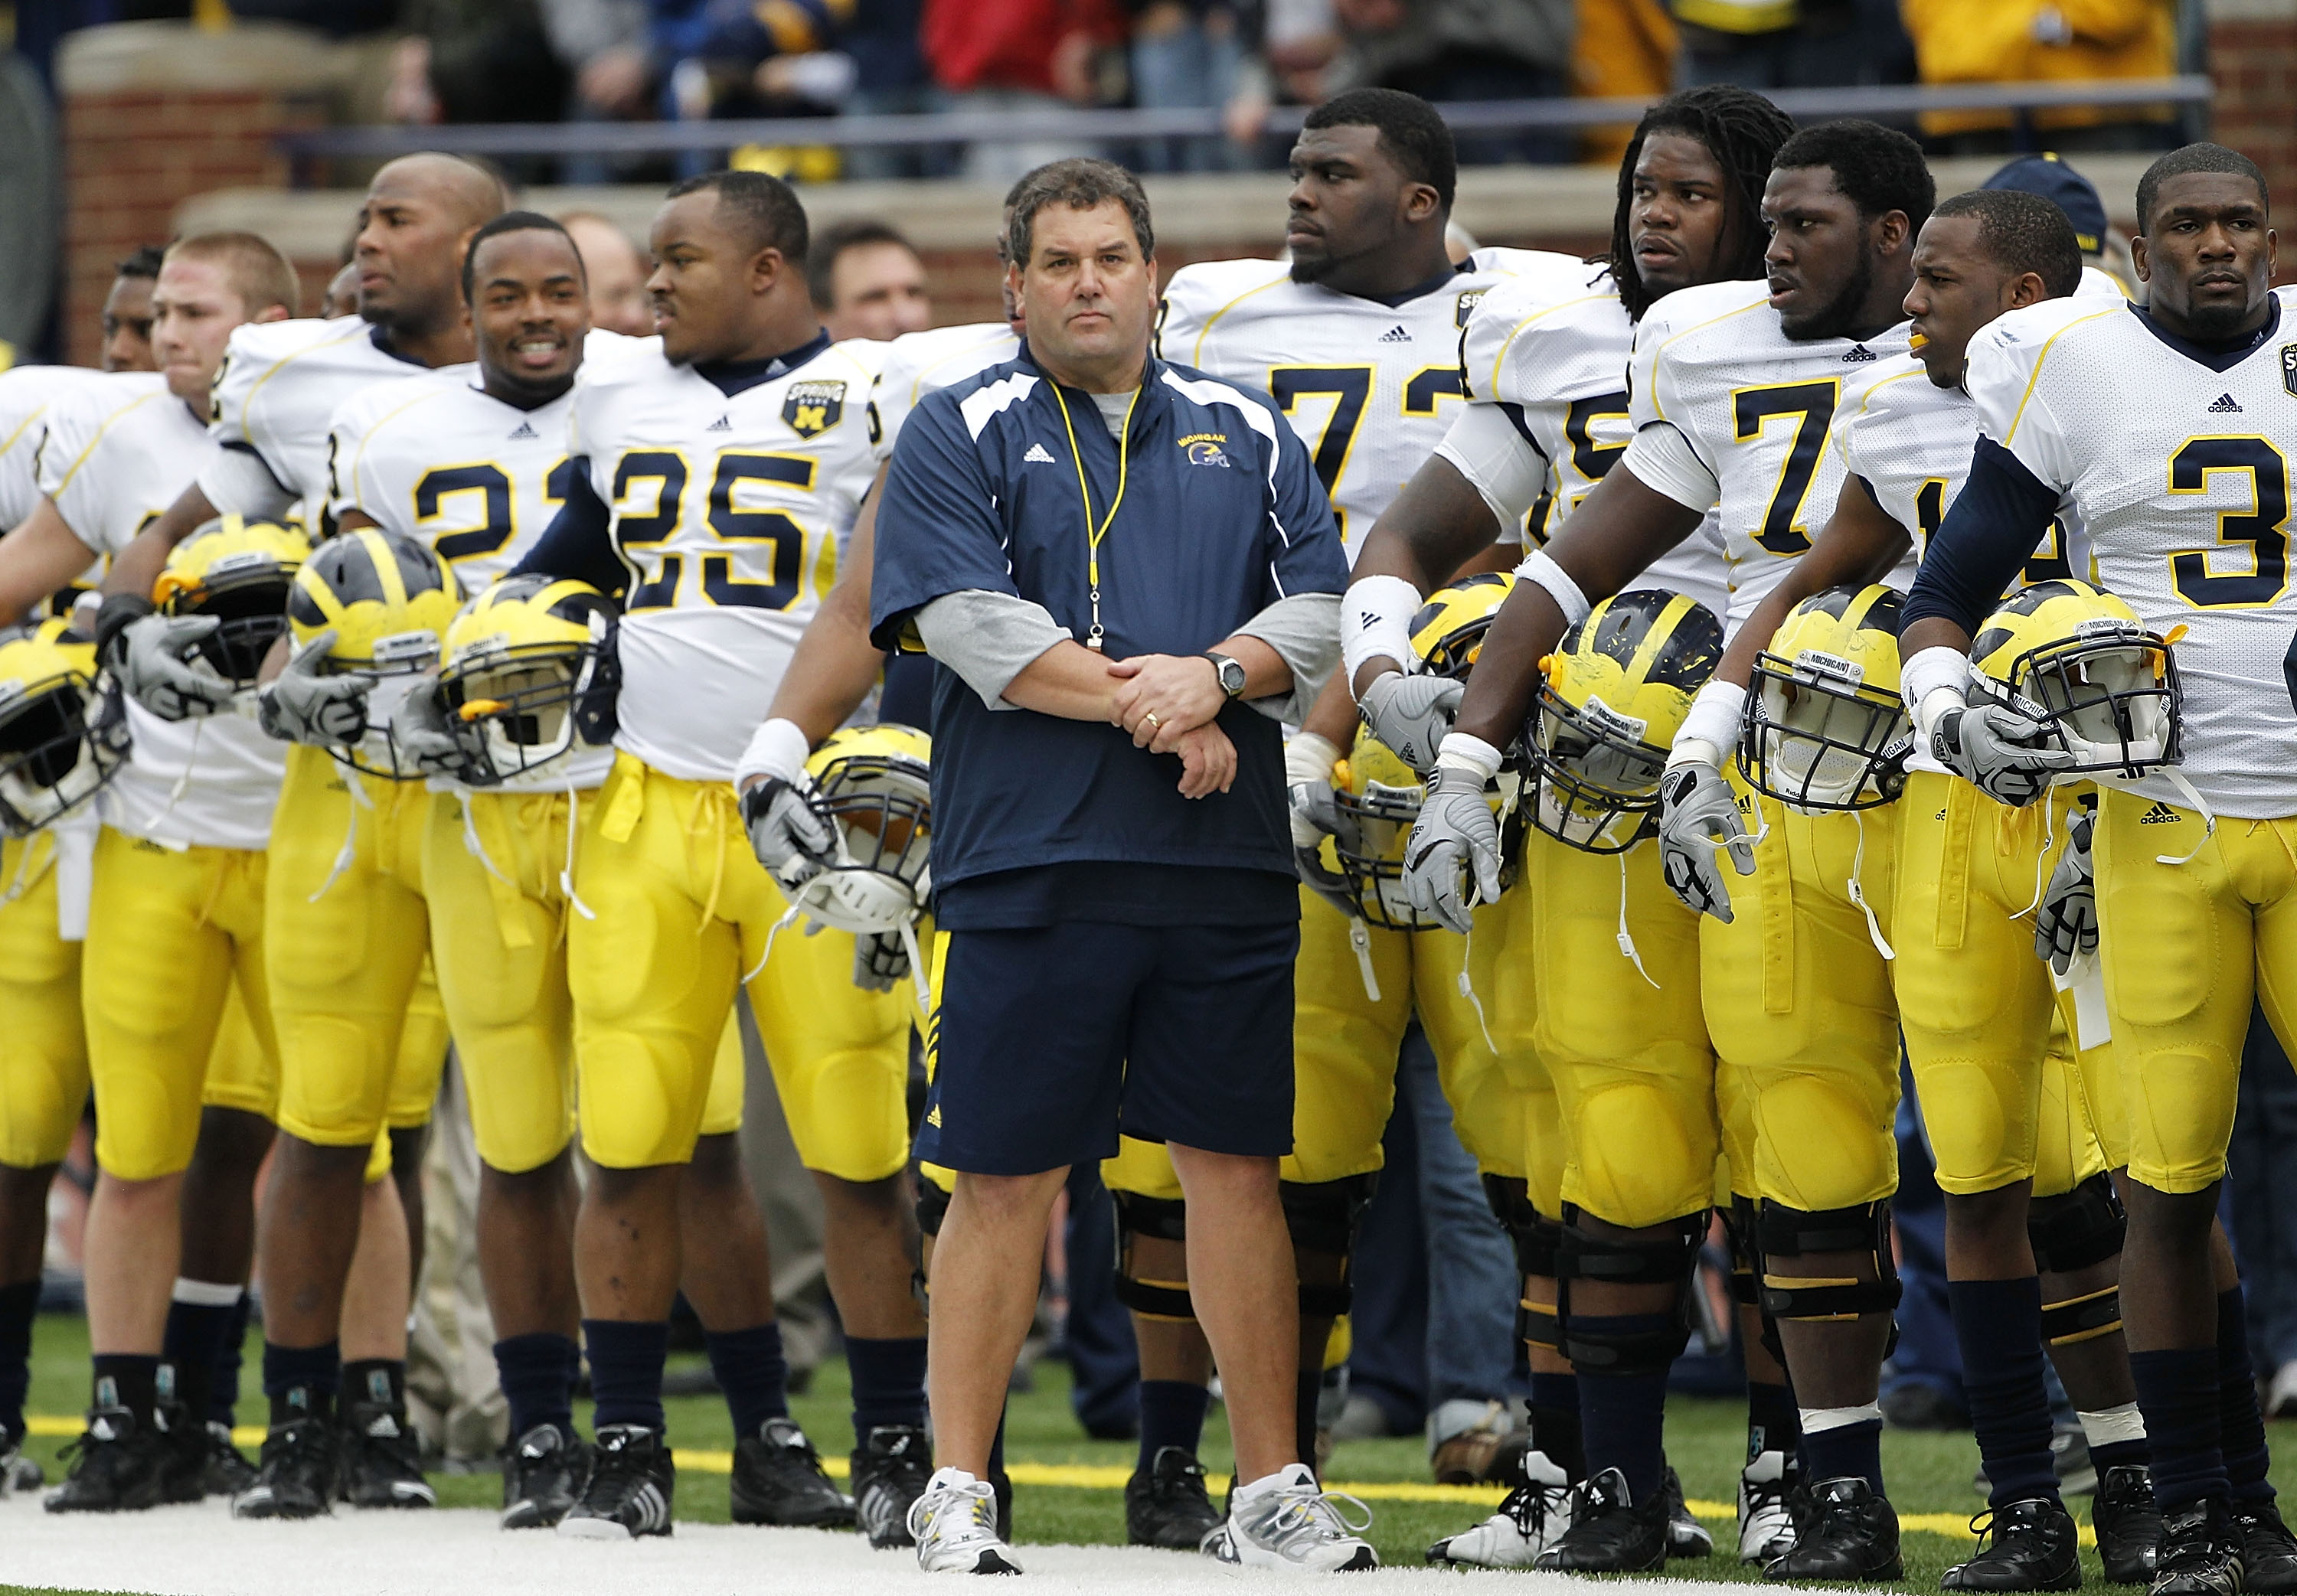 ANN ARBOR, MI - APRIL 16:  Head football coach Brady Hoke stands with his team prior to the start of the annual Spring Game at Michigan Stadium on April 16, 2011 in Ann Arbor, Michigan.  (Photo by Leon Halip/Getty Images)